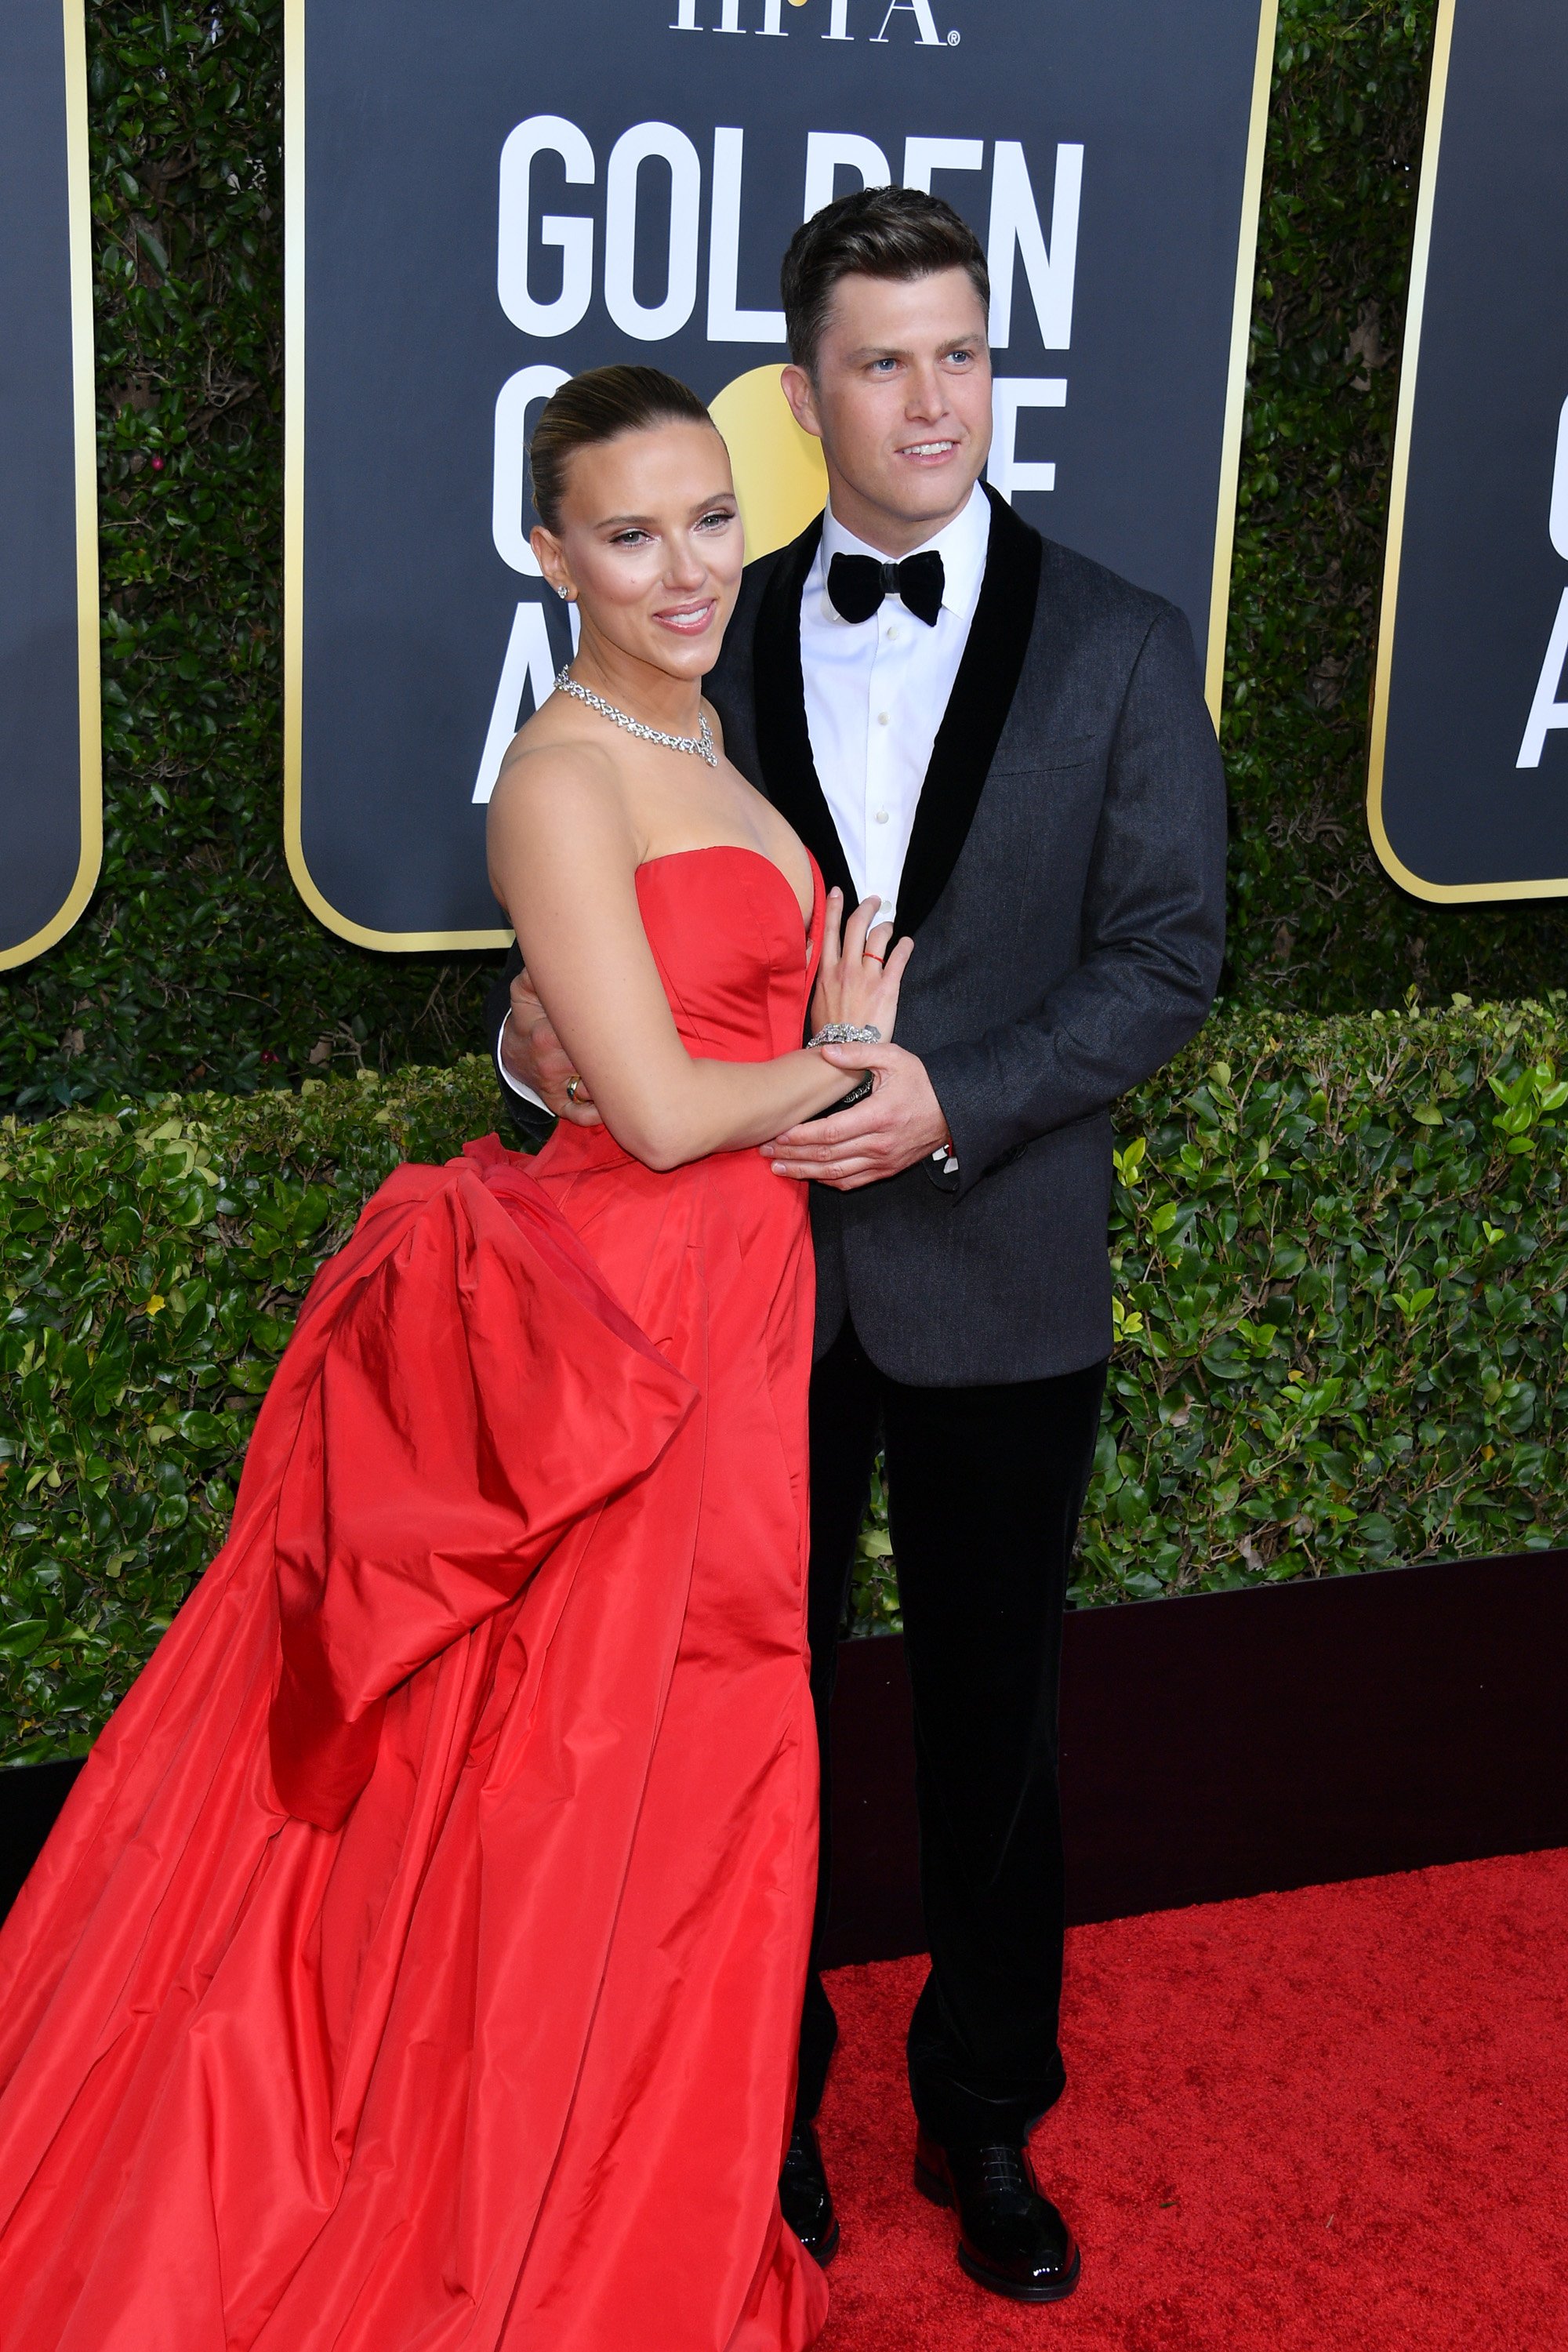 Scarlett Johansson and Colin Jost attend the 77th Annual Golden Globe Awards at The Beverly Hilton Hotel on January 05, 2020 in Beverly Hills, California | Photo: Getty Images